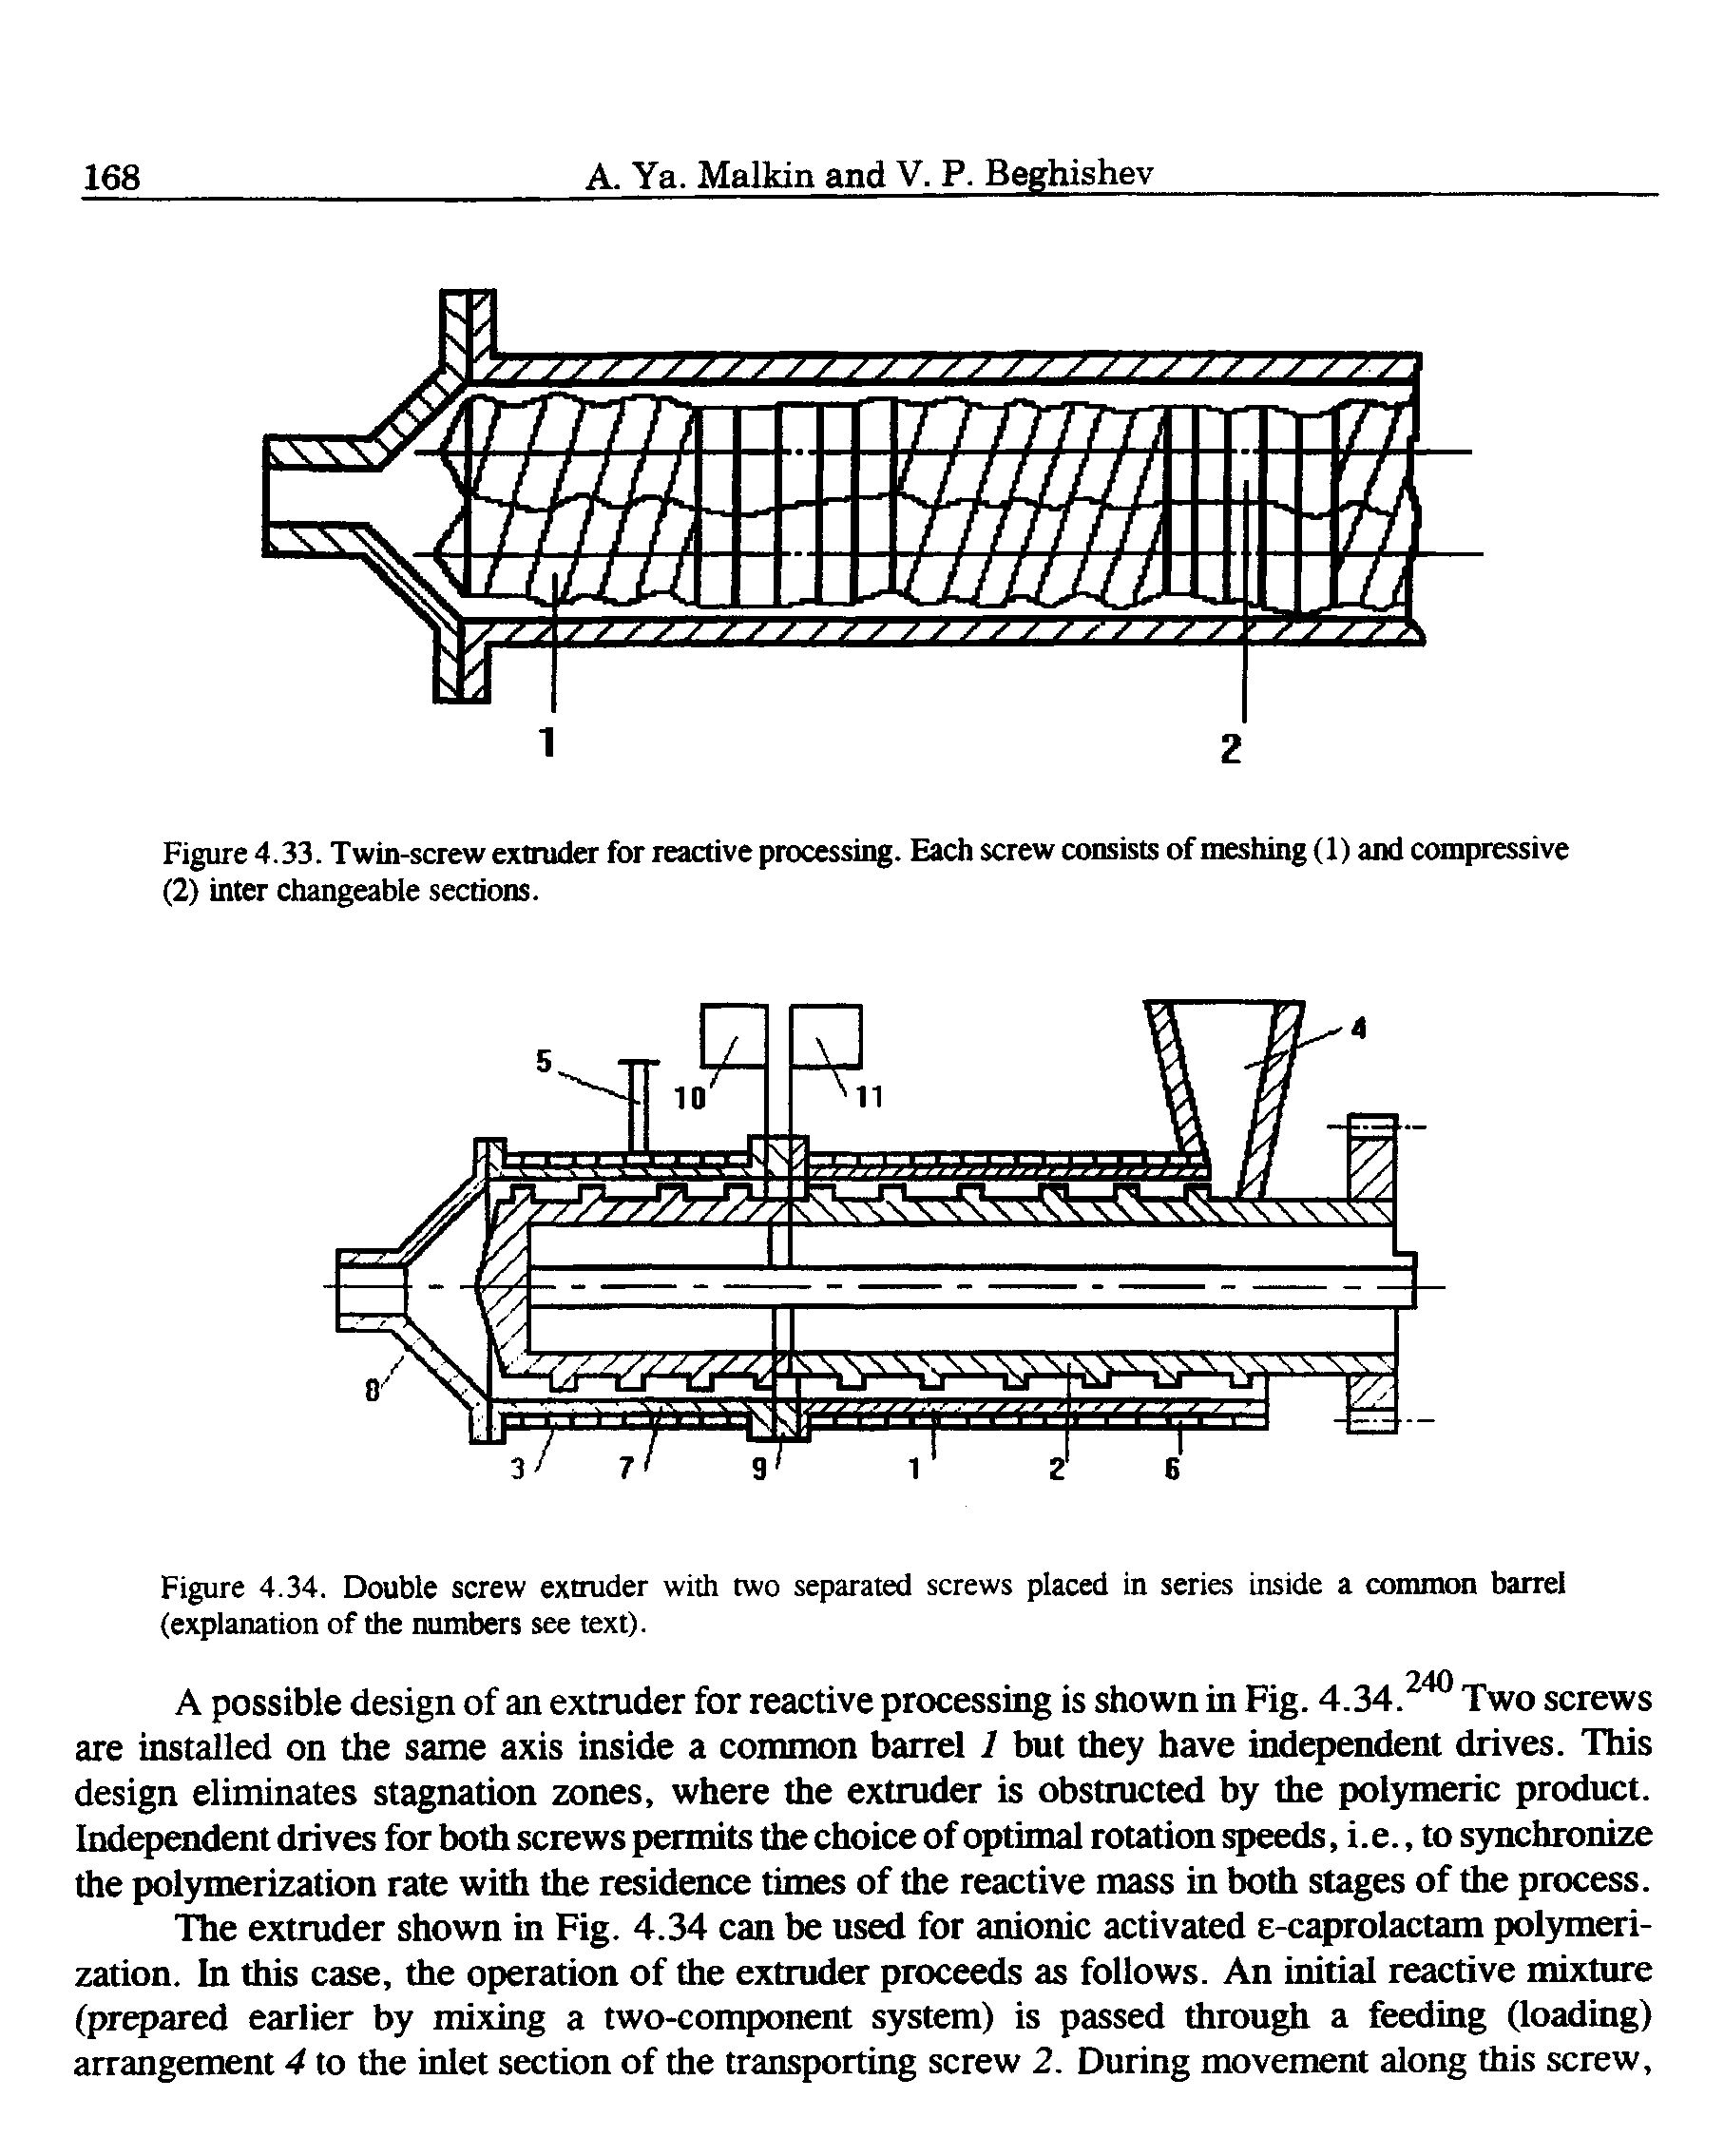 Figure 4.34. Double screw extruder with two separated screws placed in series inside a common barrel (explanation of the numbers see text).